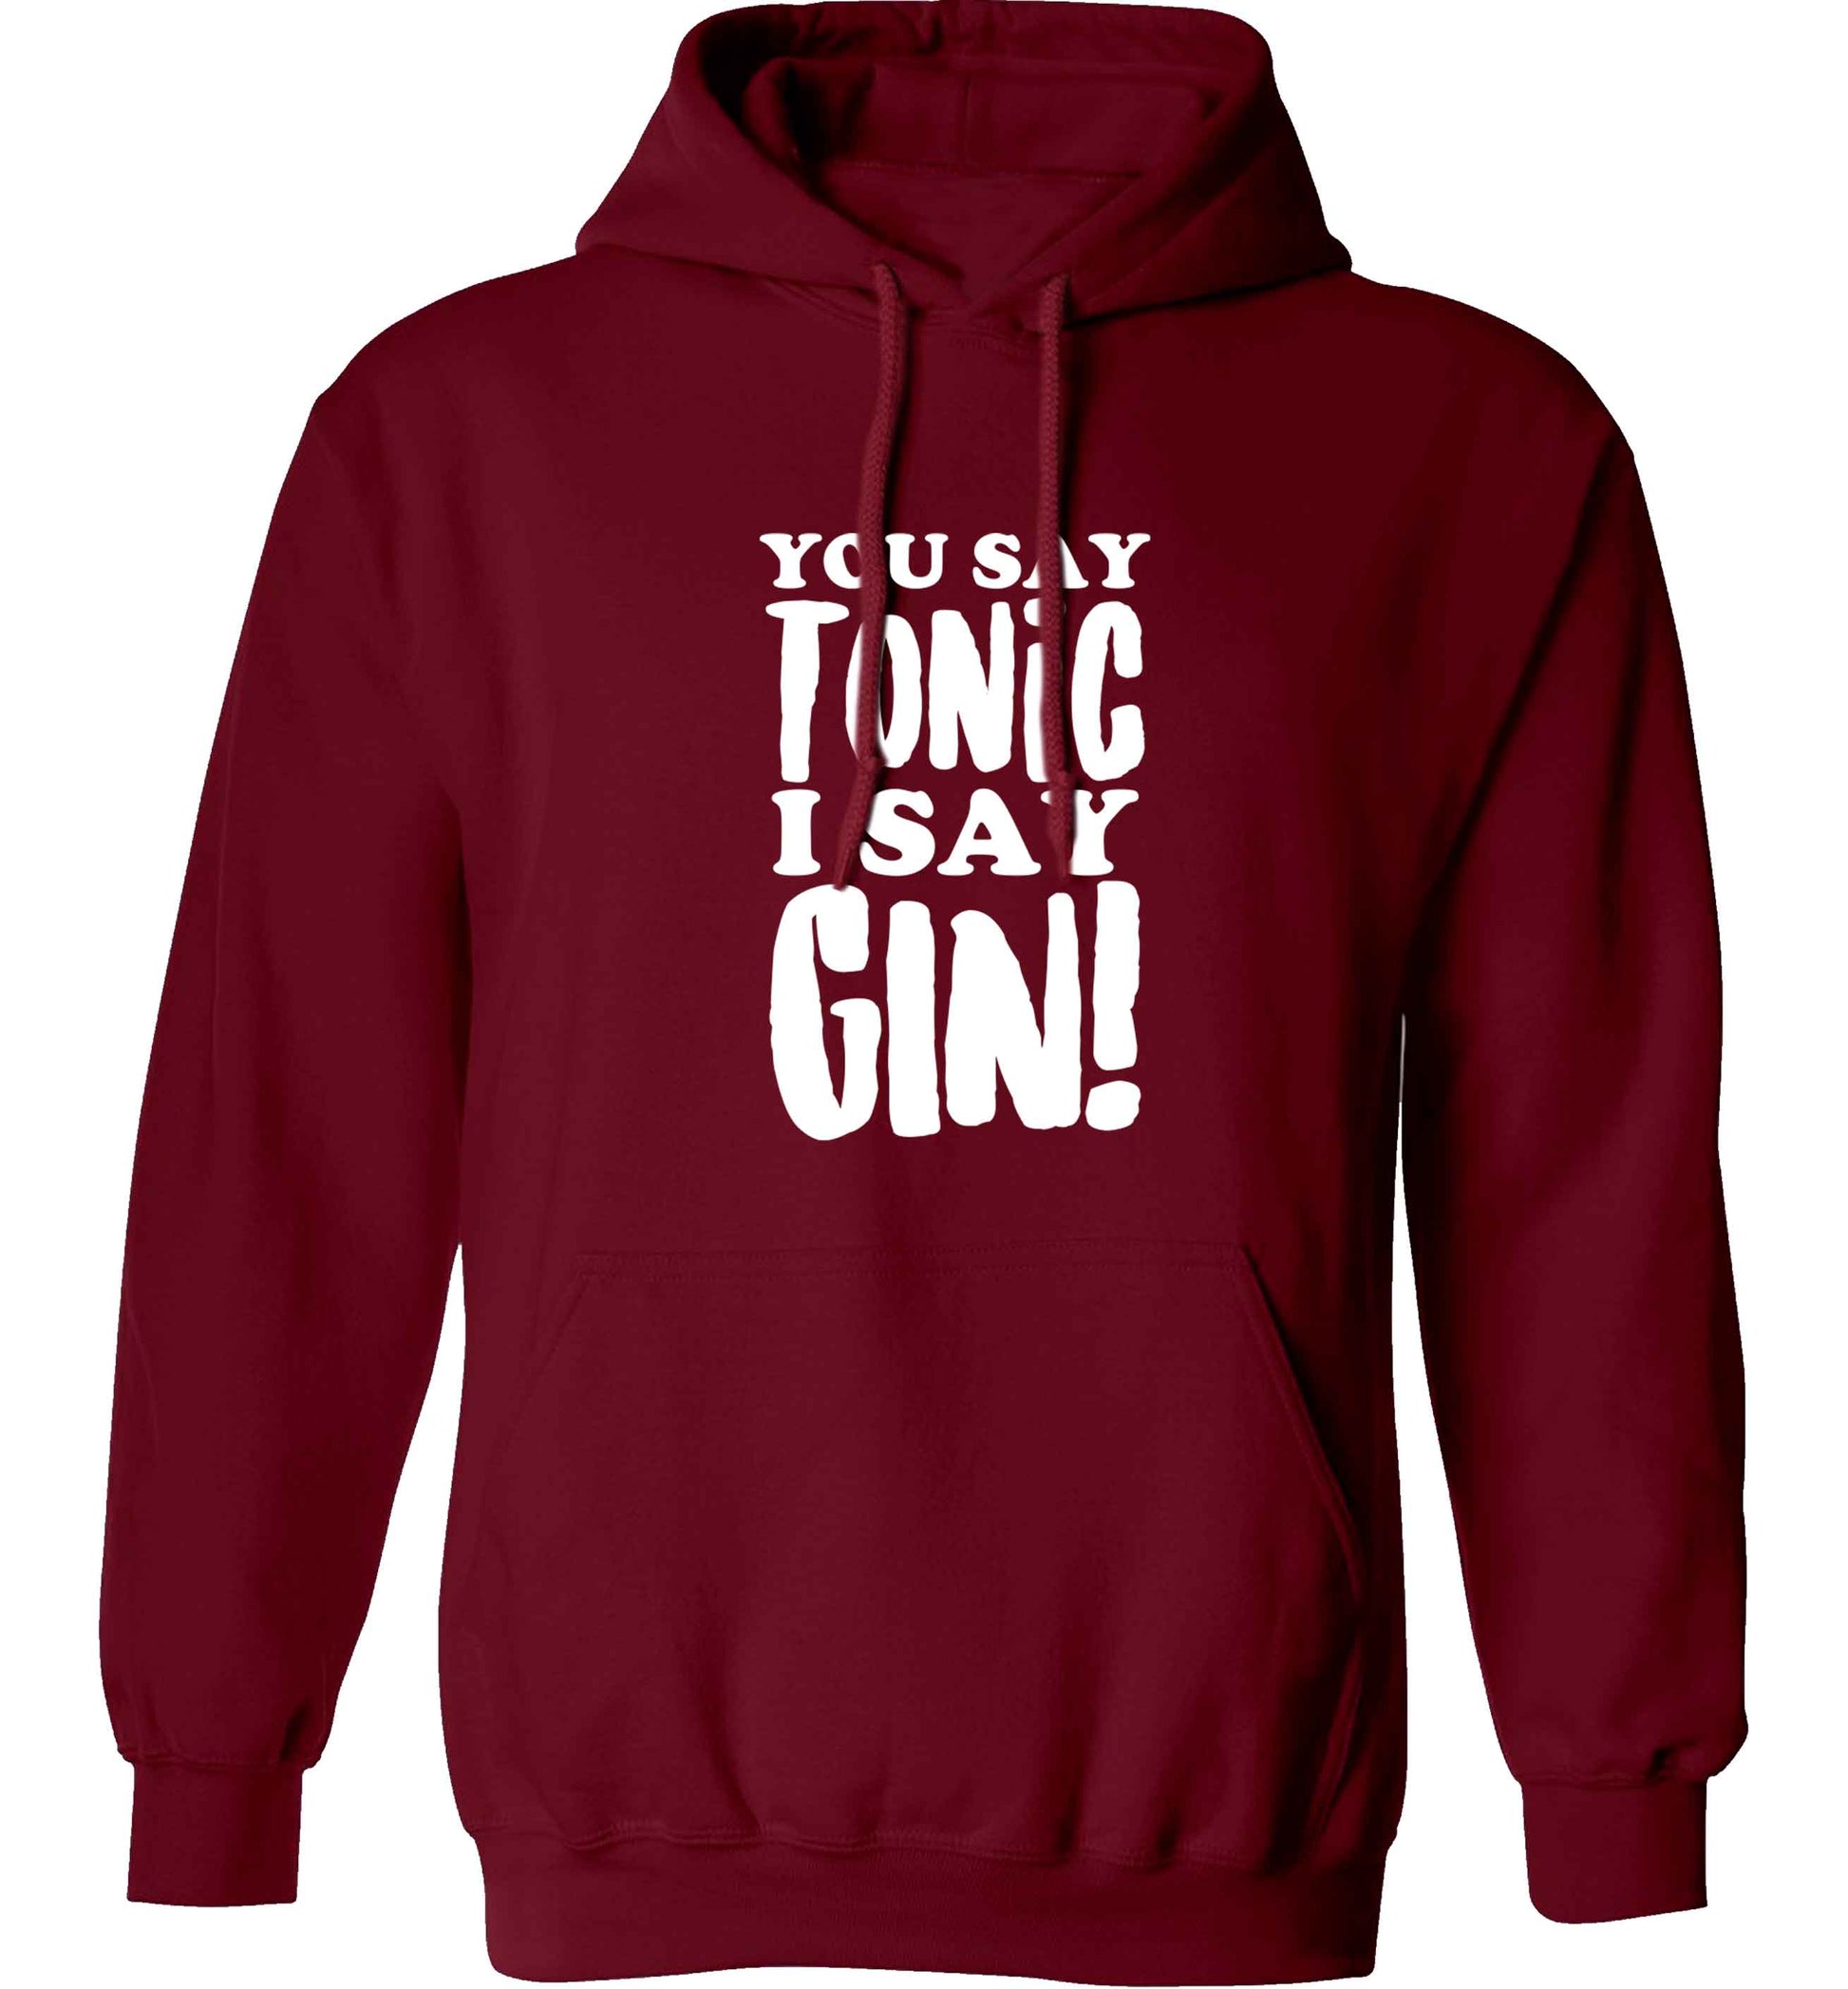 You say tonic I say gin adults unisex maroon hoodie 2XL